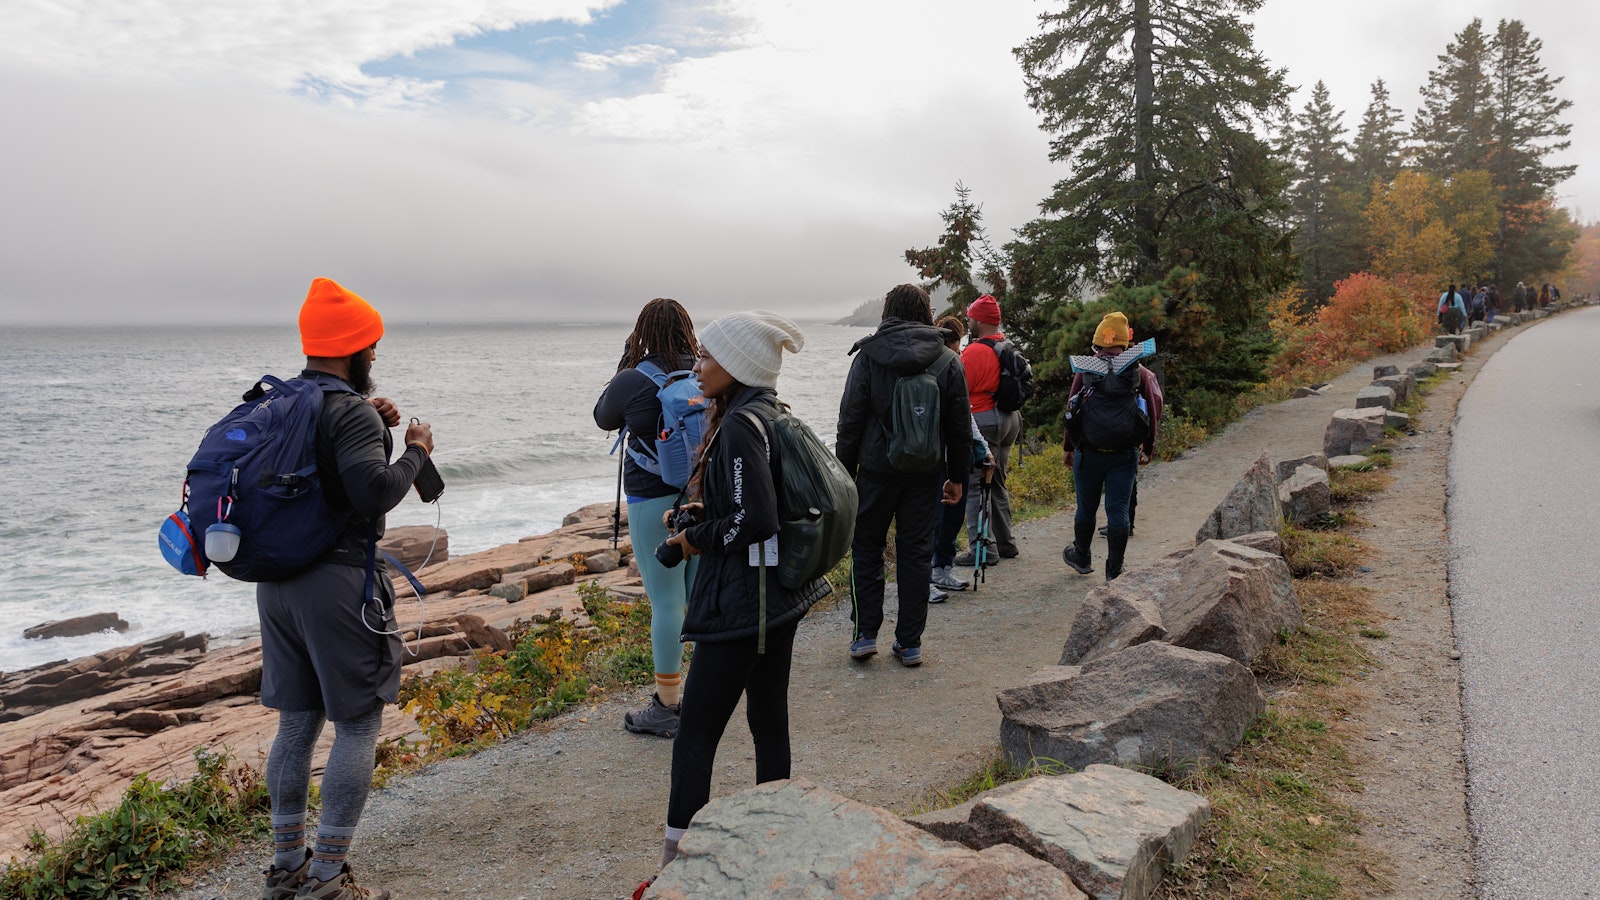 A group of people, wearing hiking gear, walk along a stone path that traces a shore